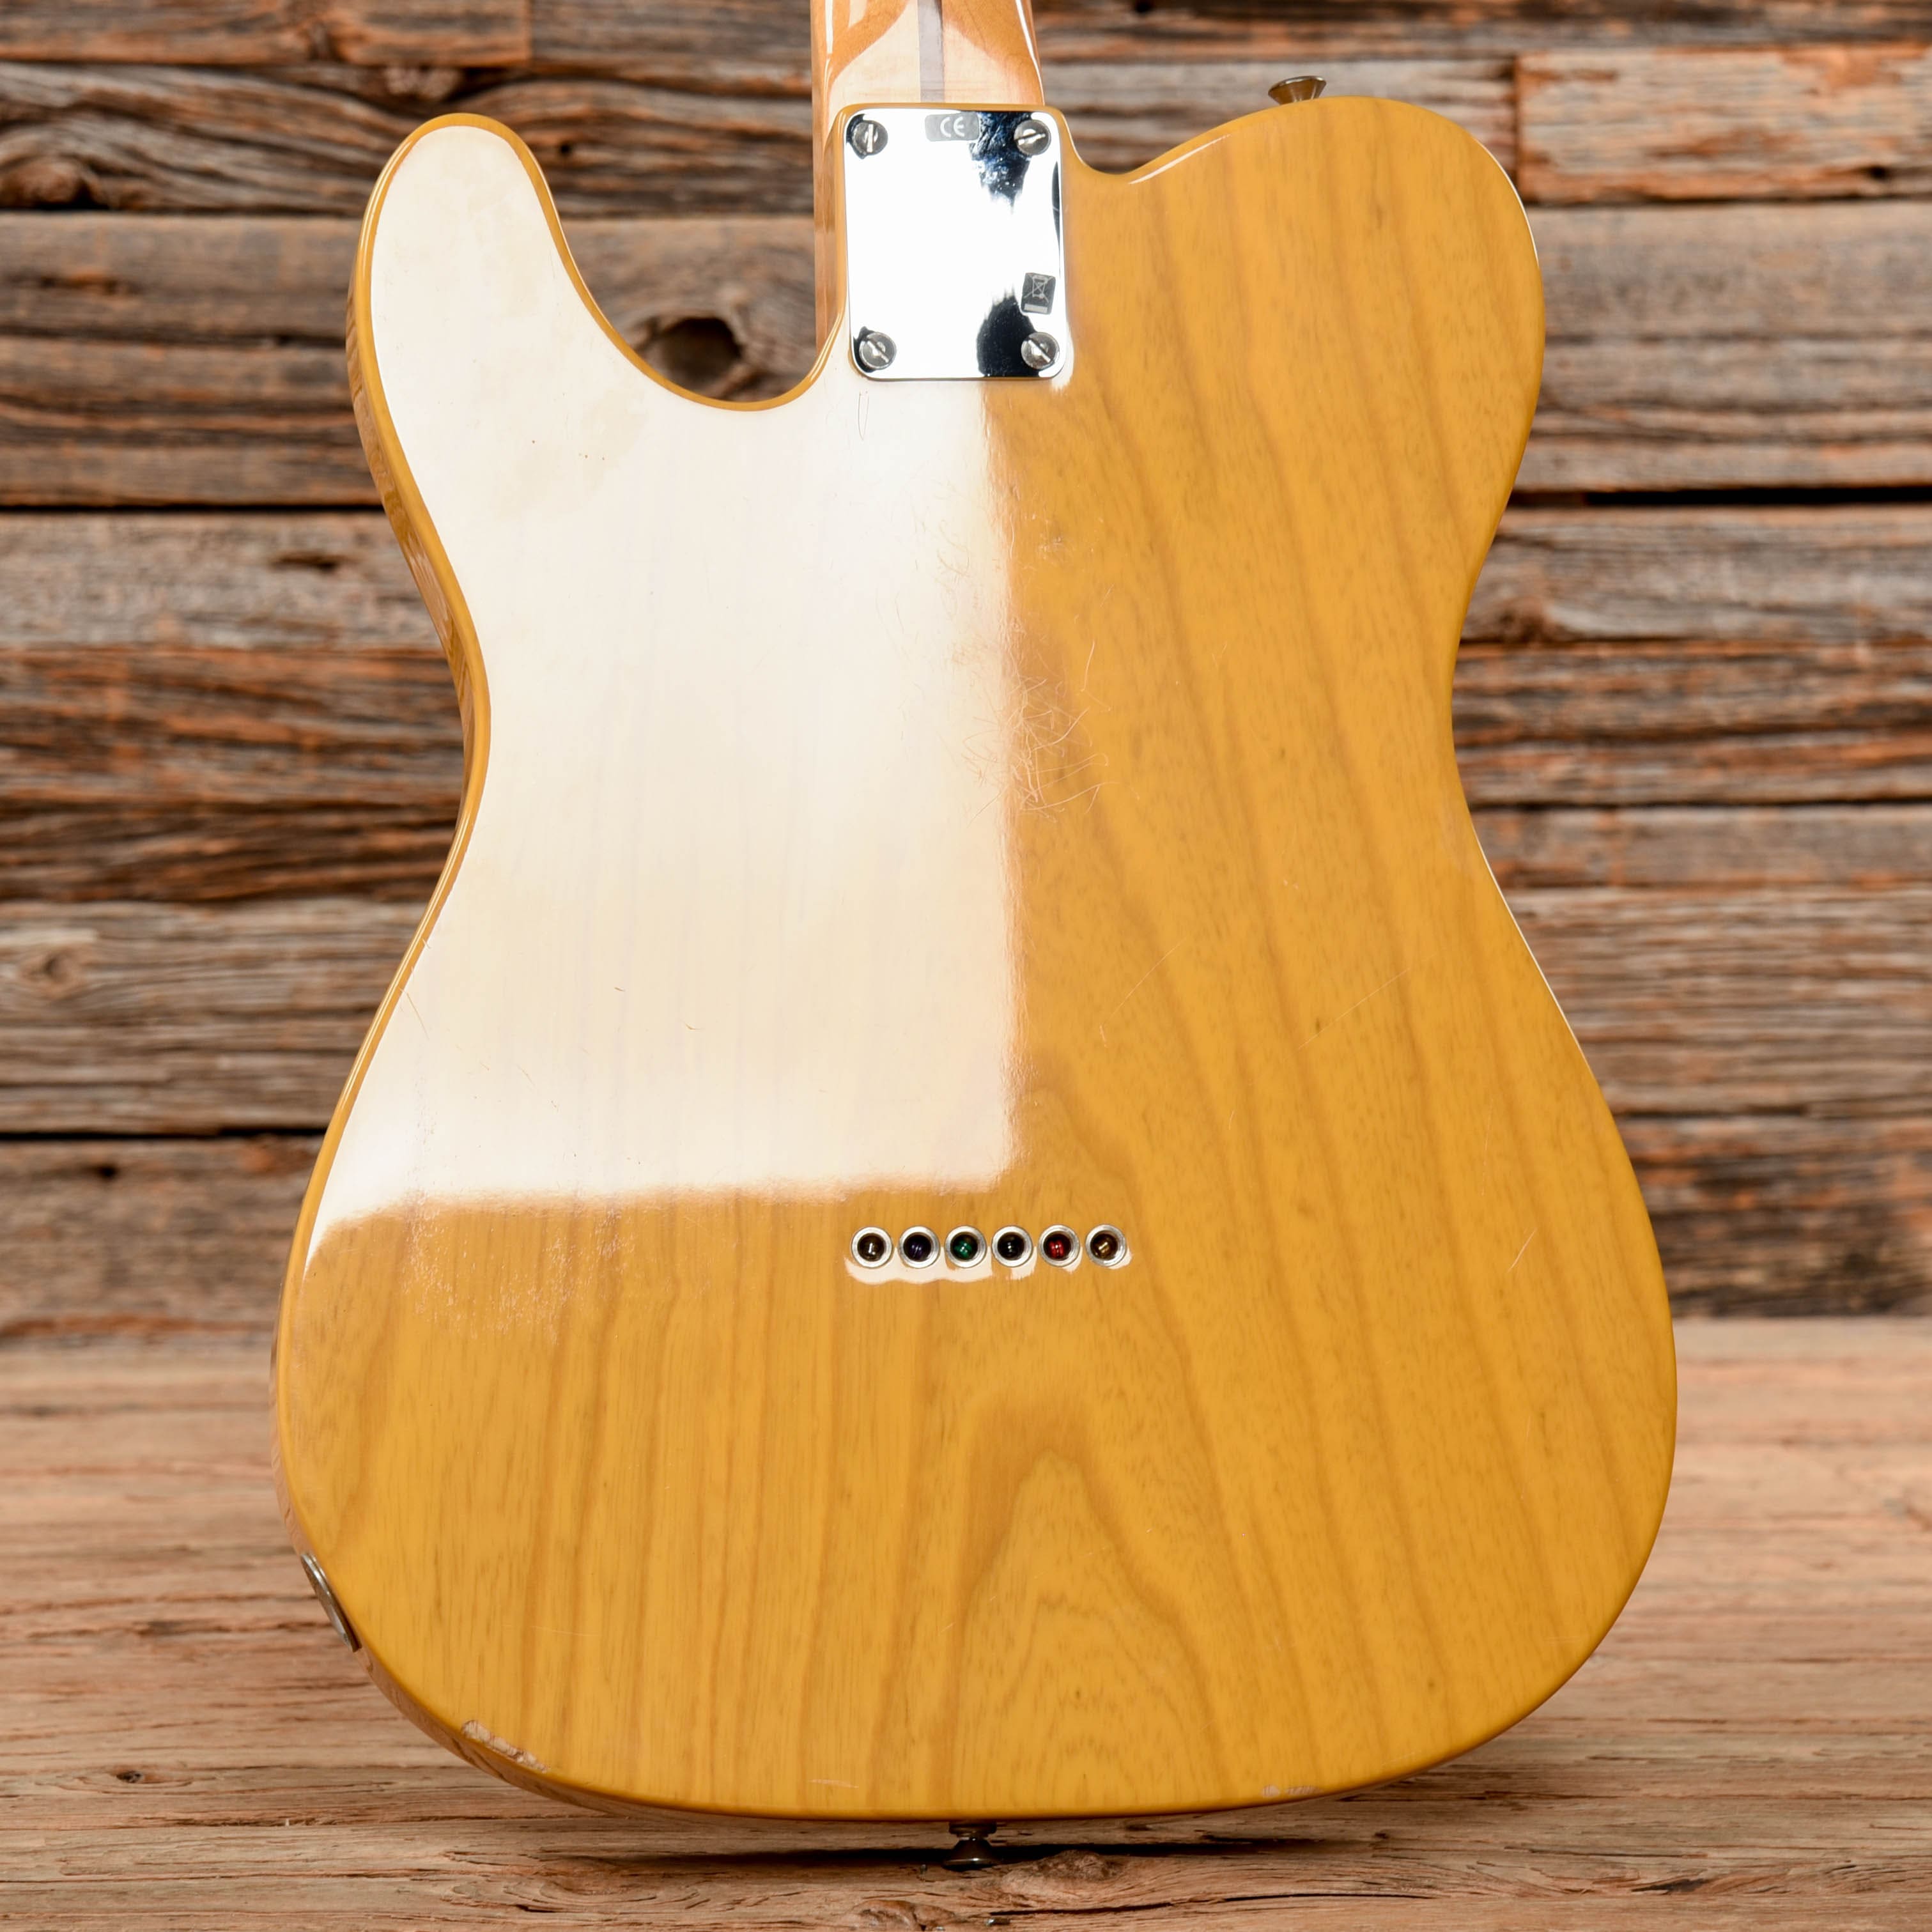 Fender American Vintage '52 Telecaster Butterscotch Blonde 2007 Electric Guitars / Solid Body